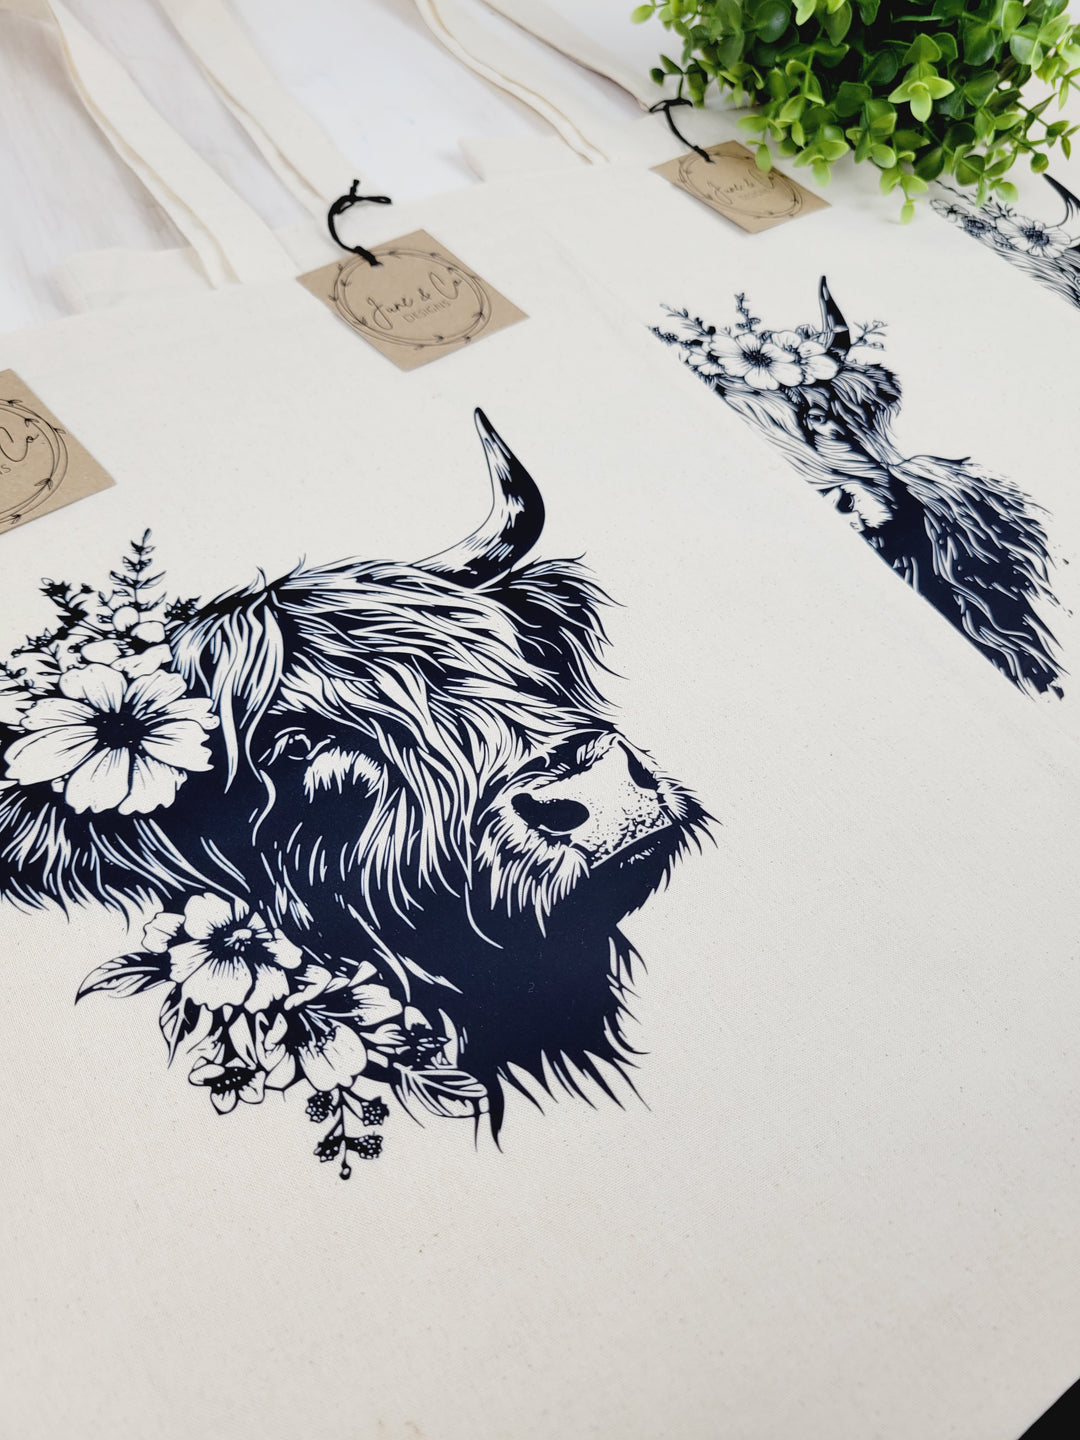 June & Co Designs, Highland Cow Canvas Bags